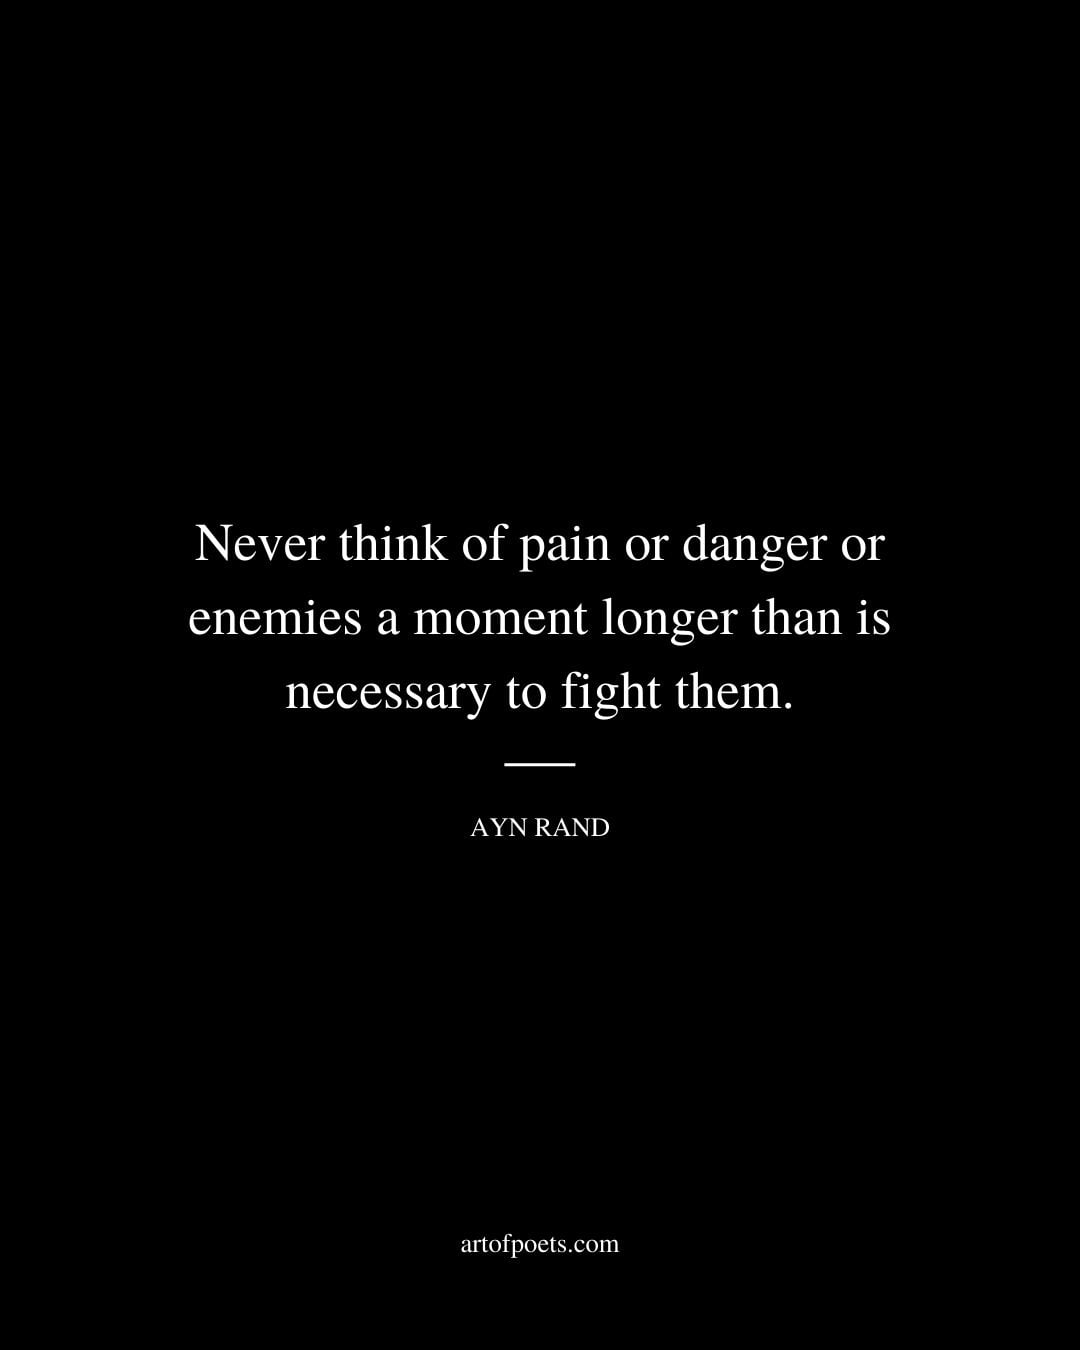 Never think of pain or danger or enemies a moment longer than is necessary to fight them